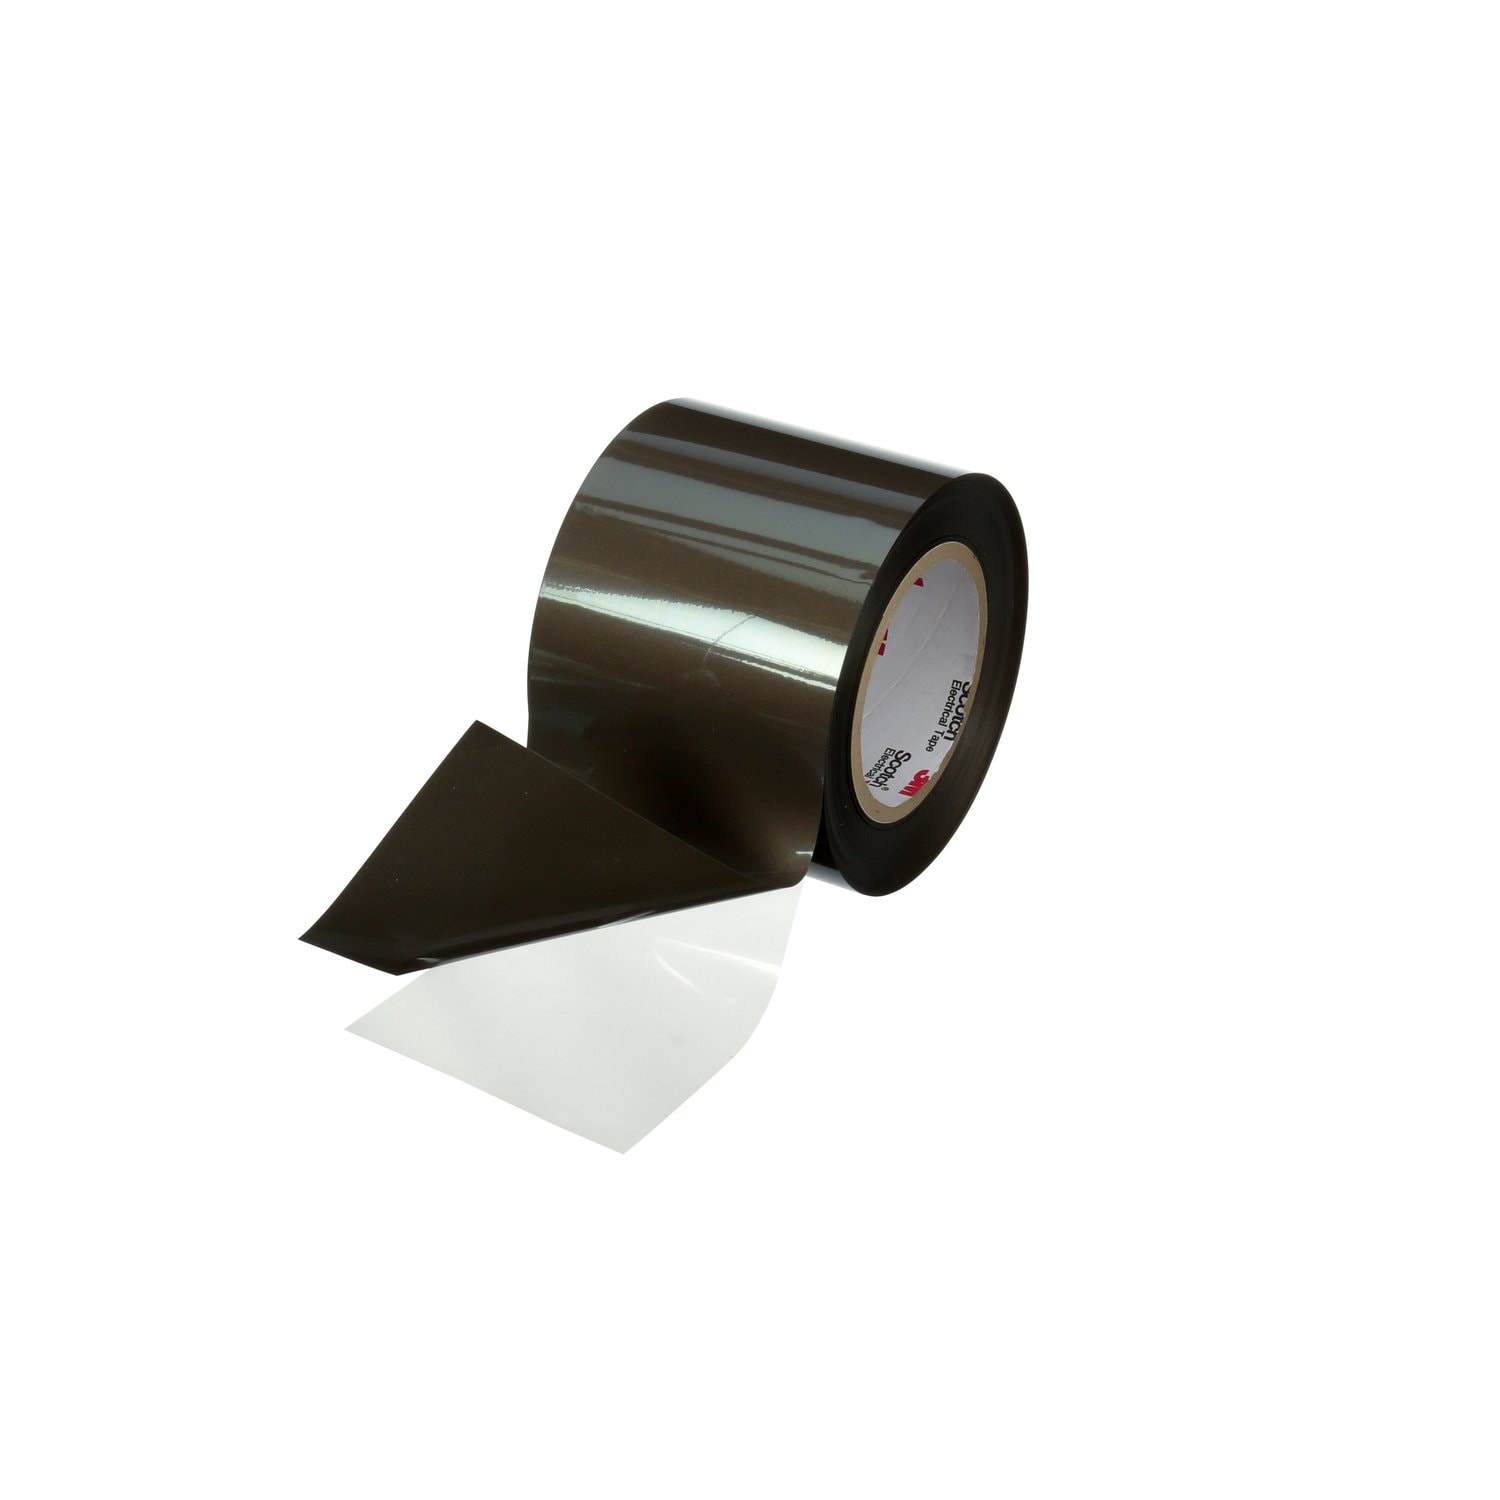 7010532050 - 3M Electrically Conductive Double-Sided Tape 9711S, 1060 mm x 100 m,
100um